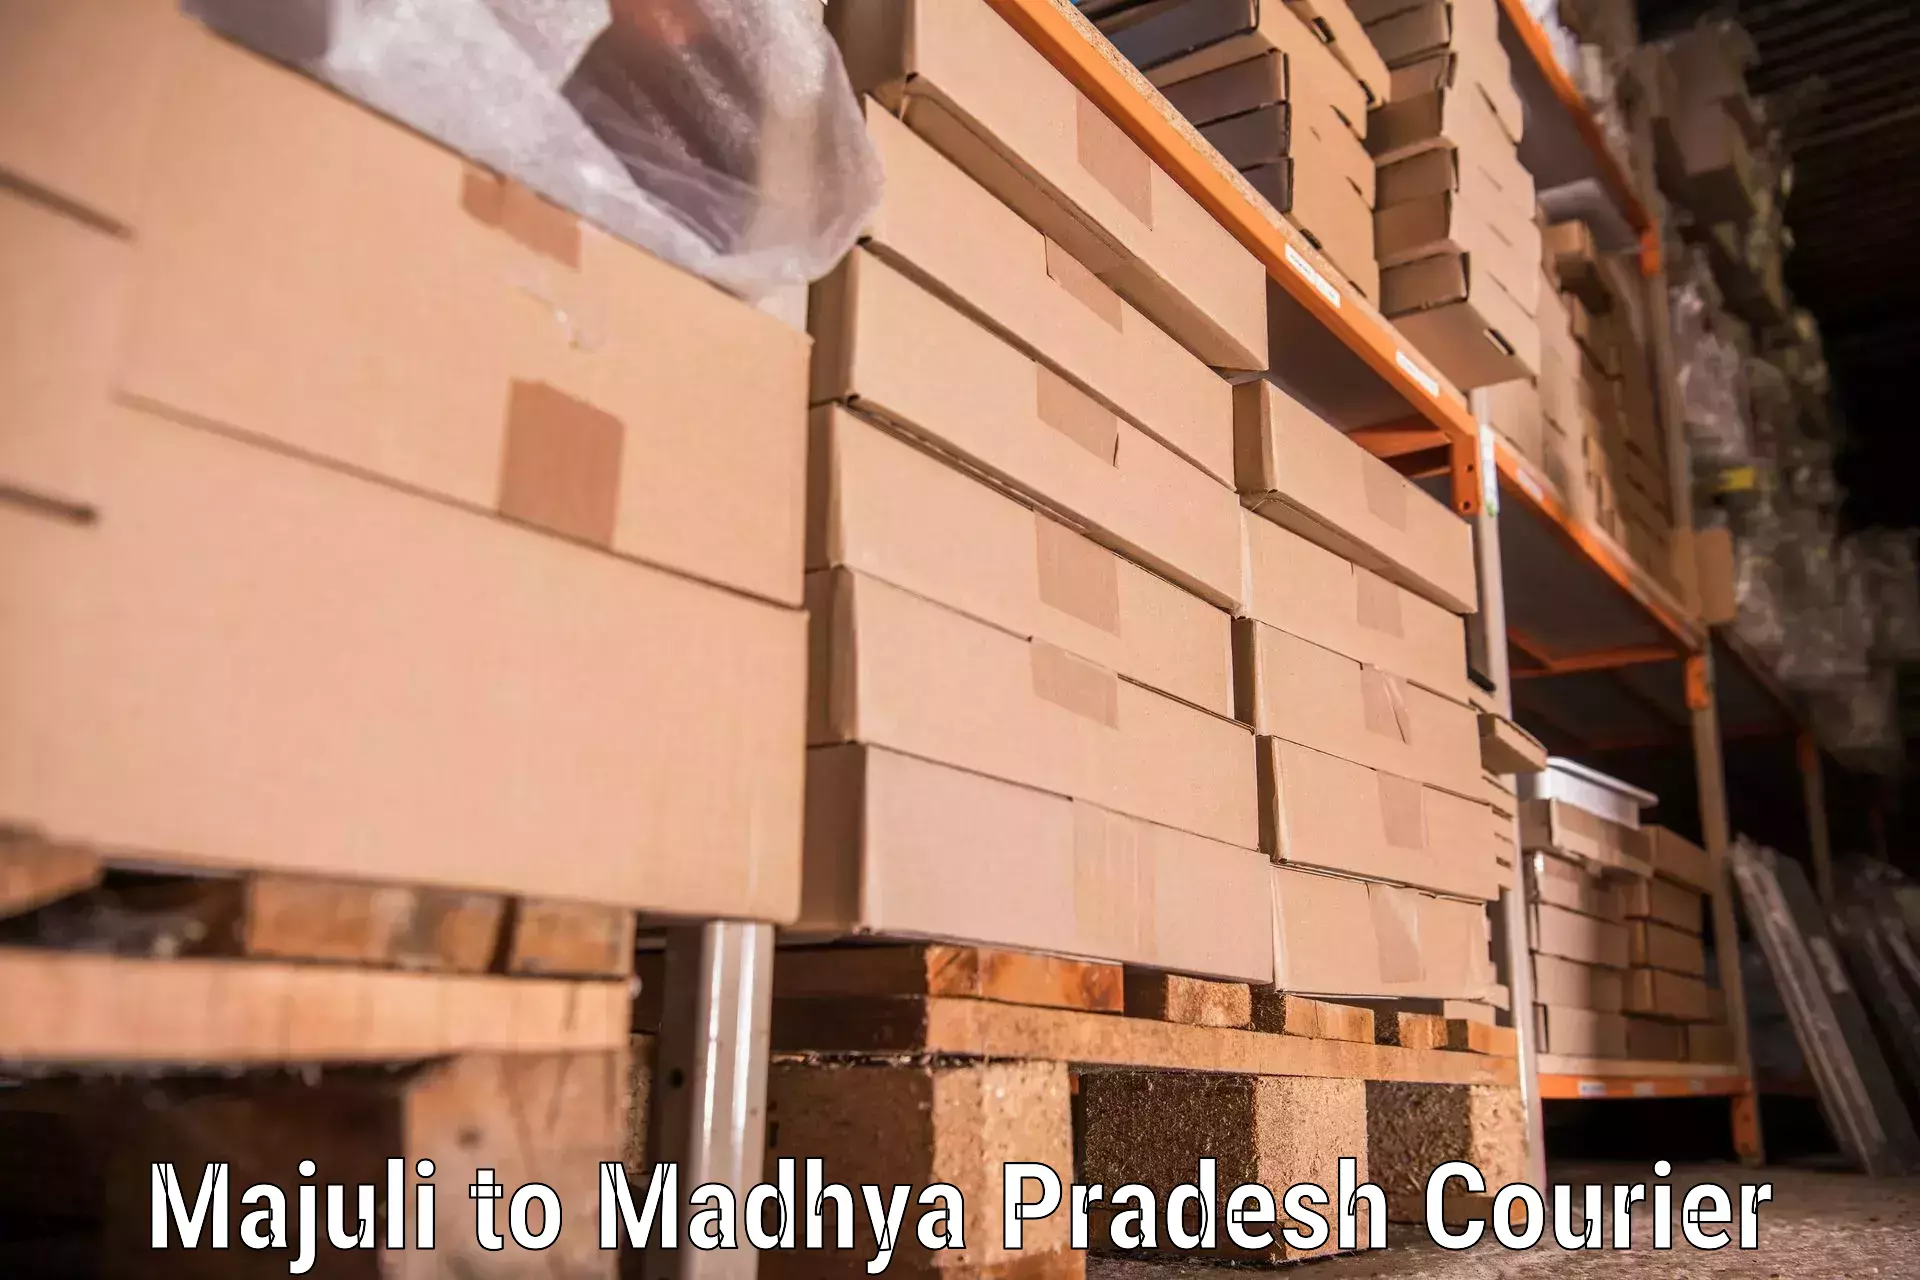 Efficient moving company Majuli to Indore